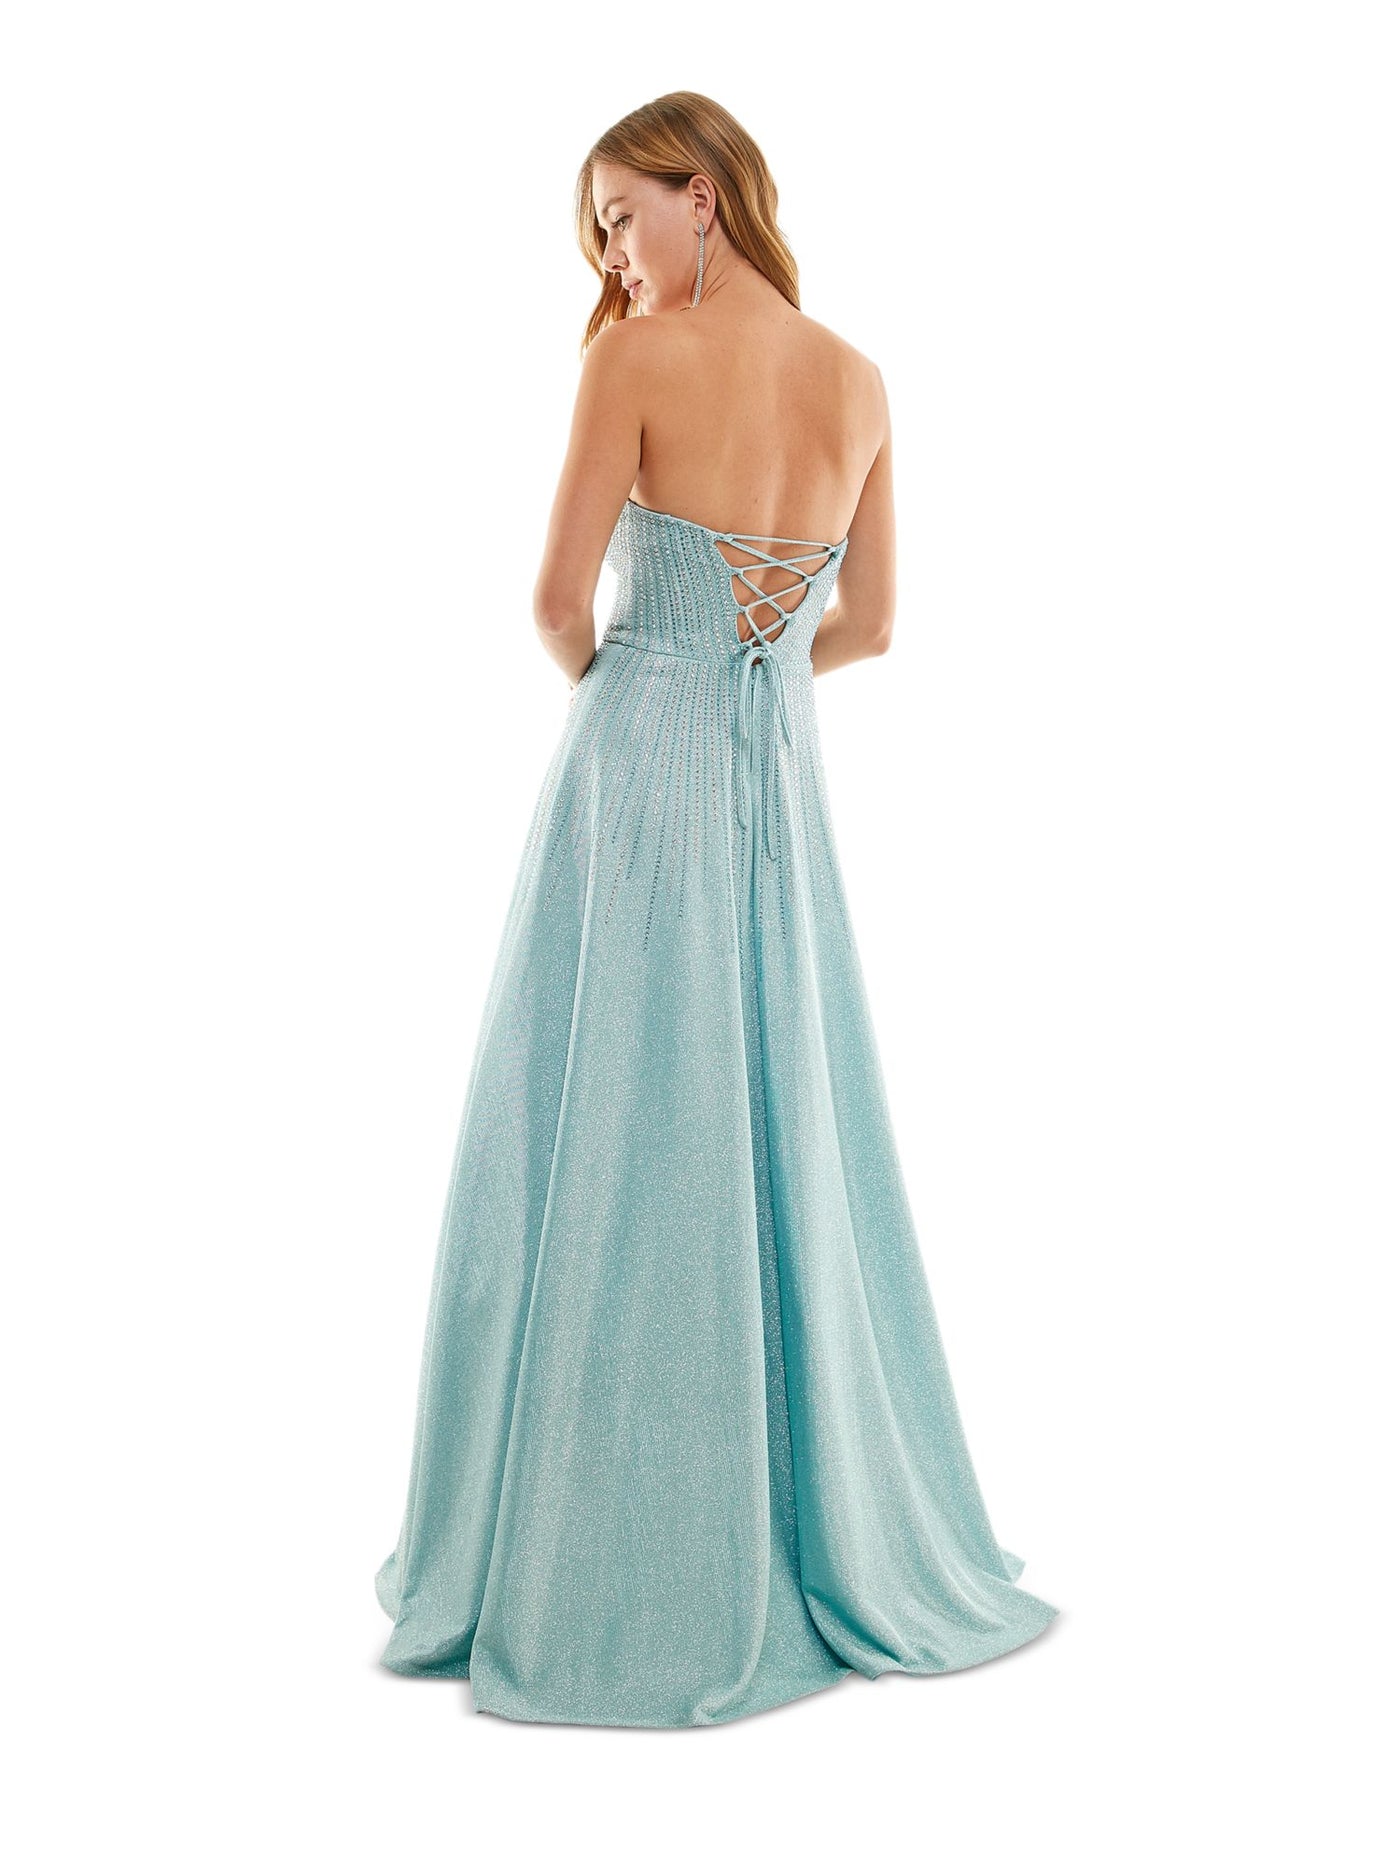 SAY YES TO THE PROM Womens Light Blue Embellished Zippered Padded Lined Tulle Lace Up Back Sleeveless Strapless Full-Length Formal Gown Dress Juniors 7